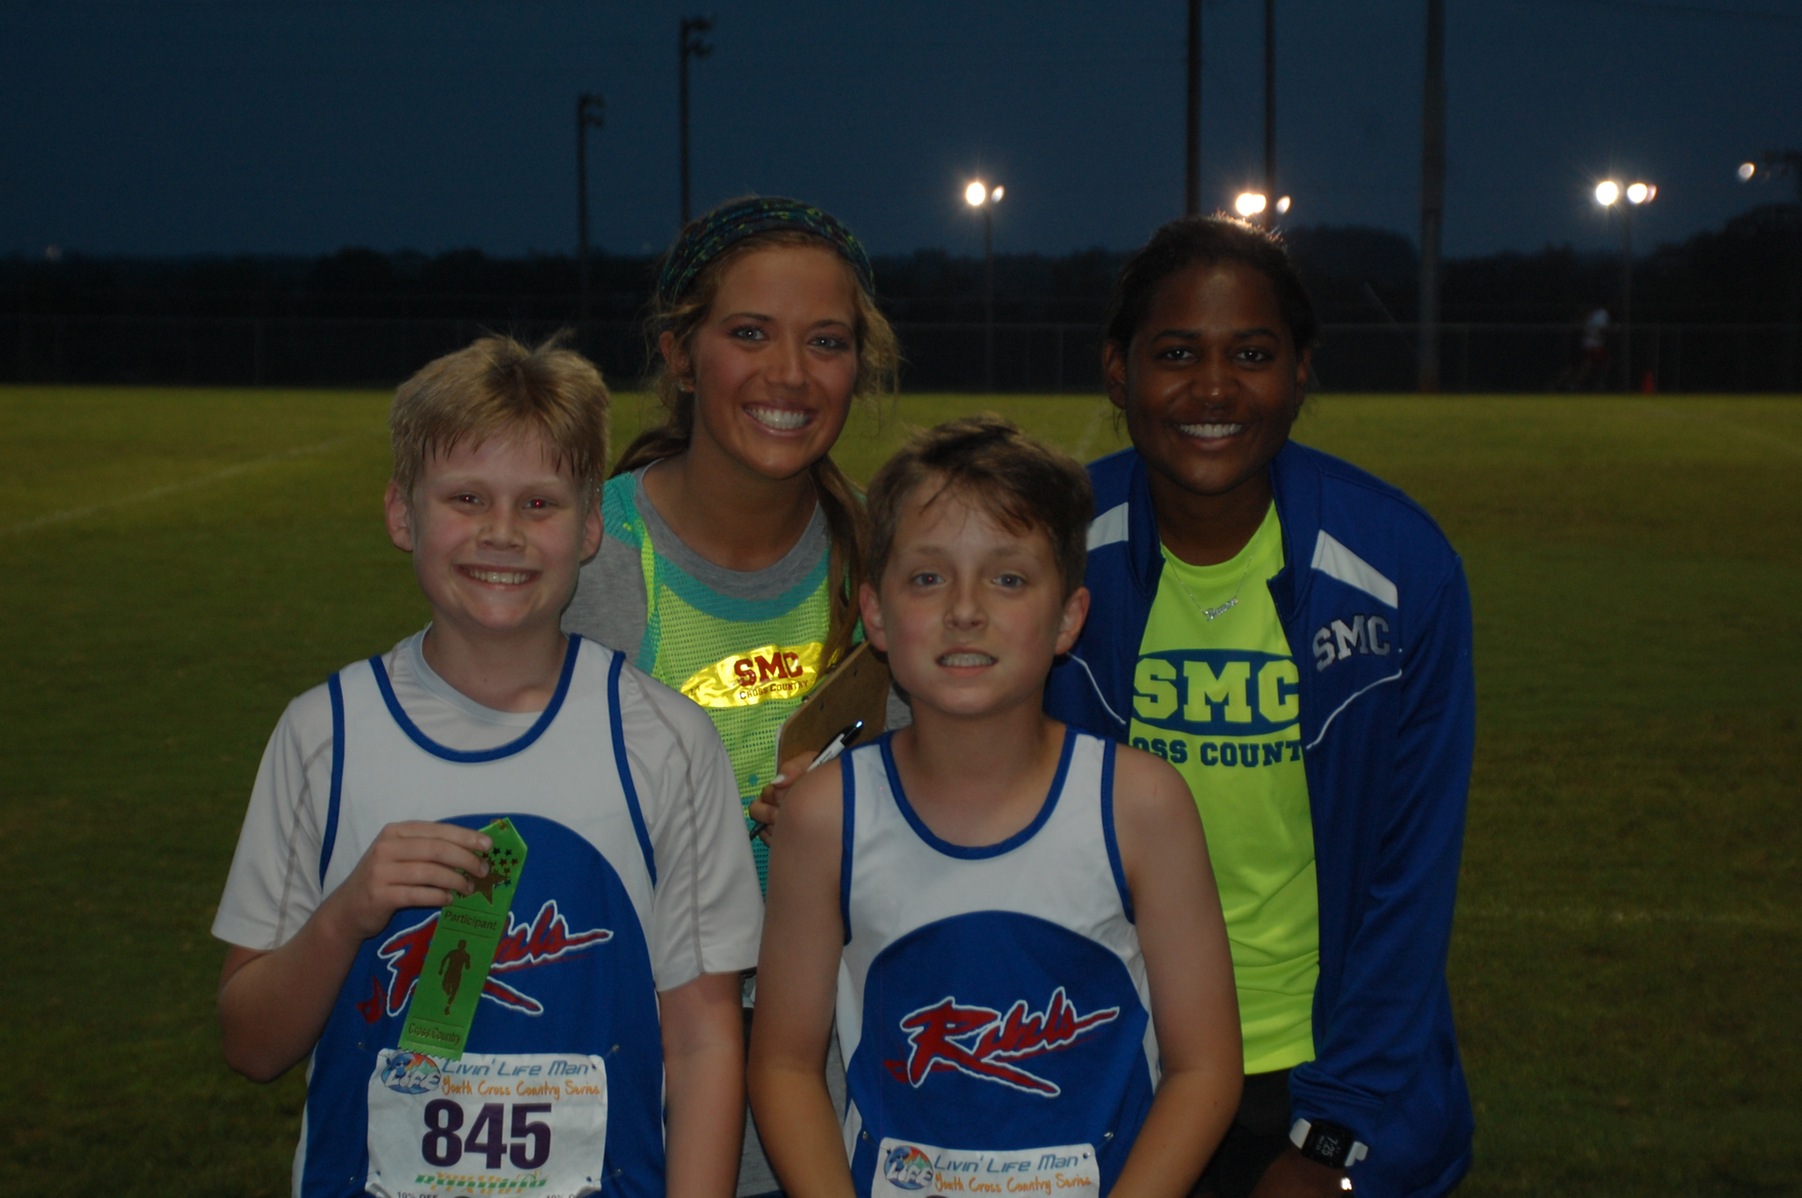 SMC Pioneers XC/TF enjoys time with youth runners